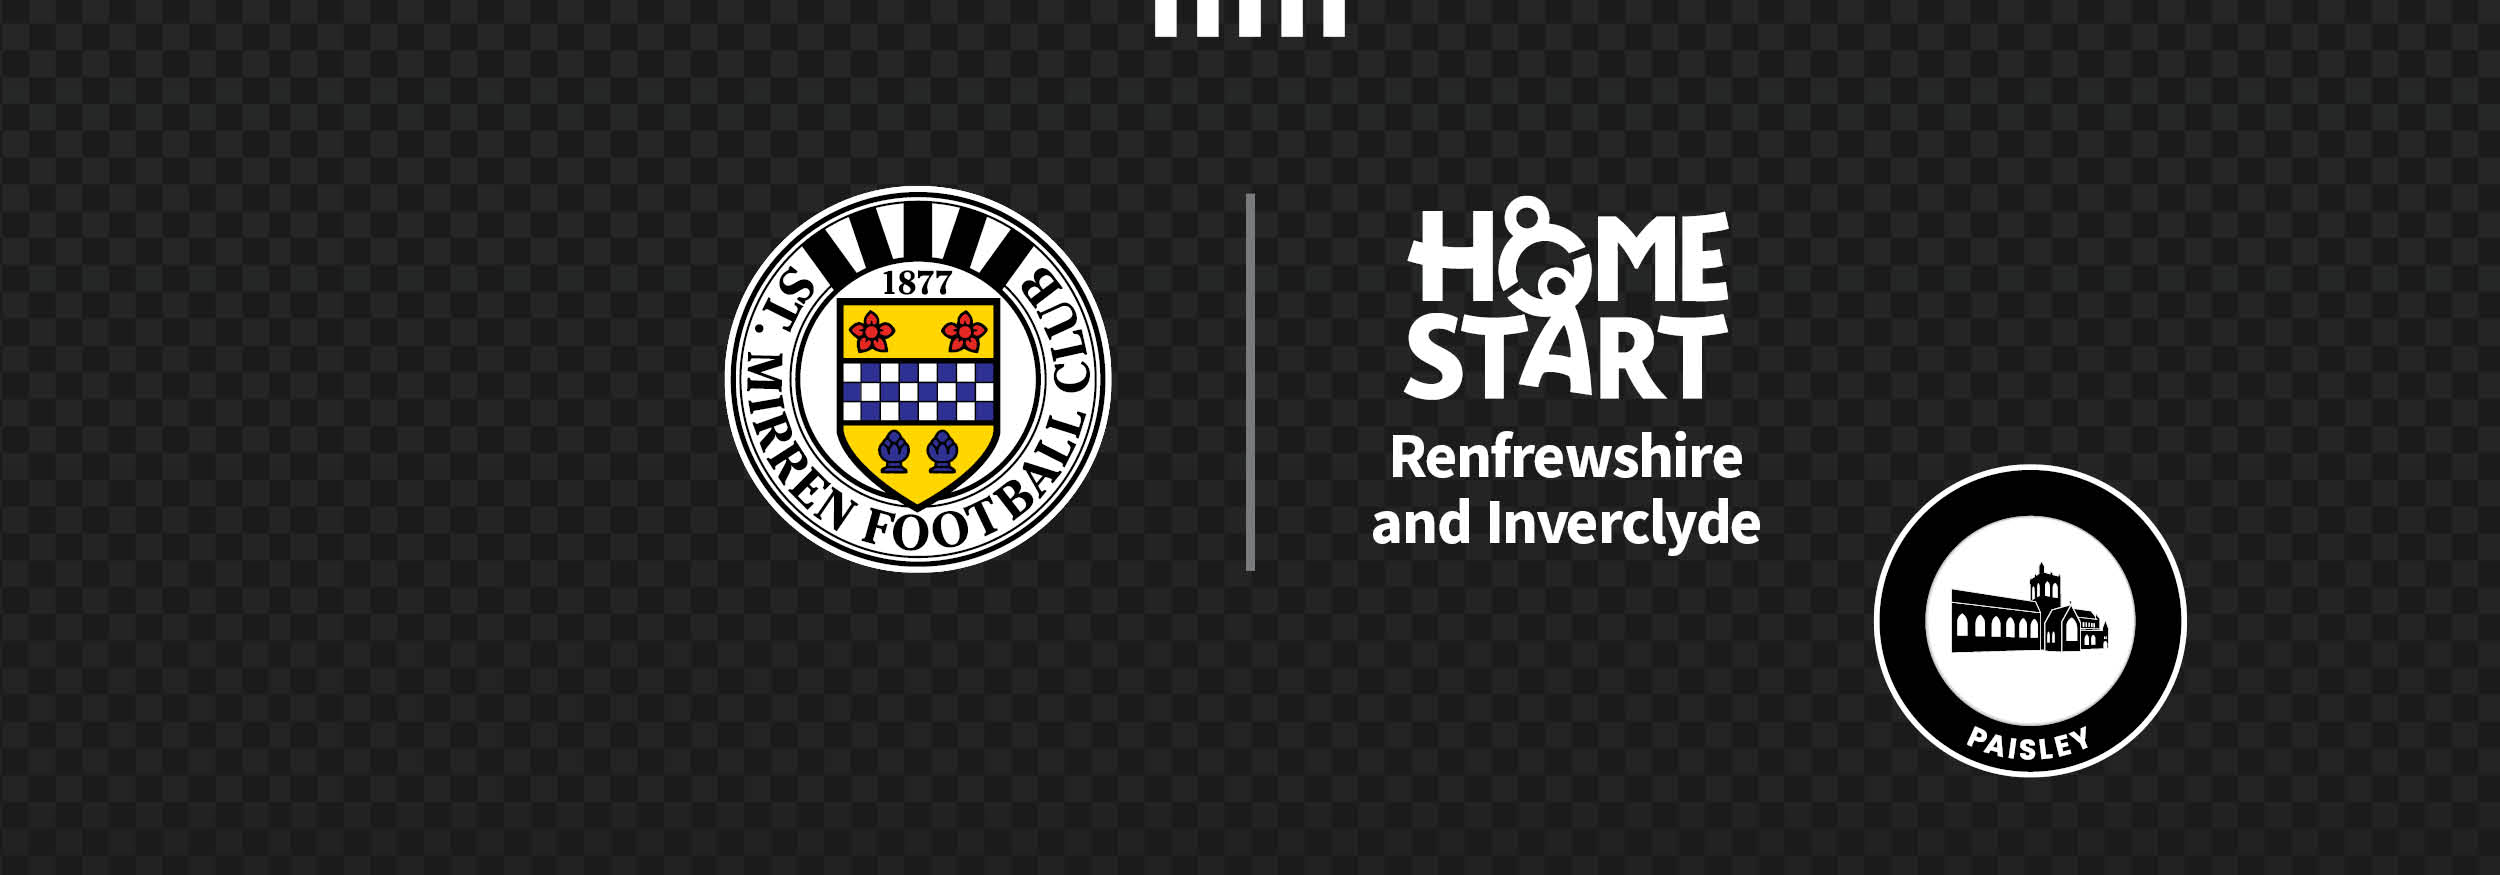 St Mirren Announce Strategic Charity Partnership with Home-Start Renfrewshire and Inverclyde